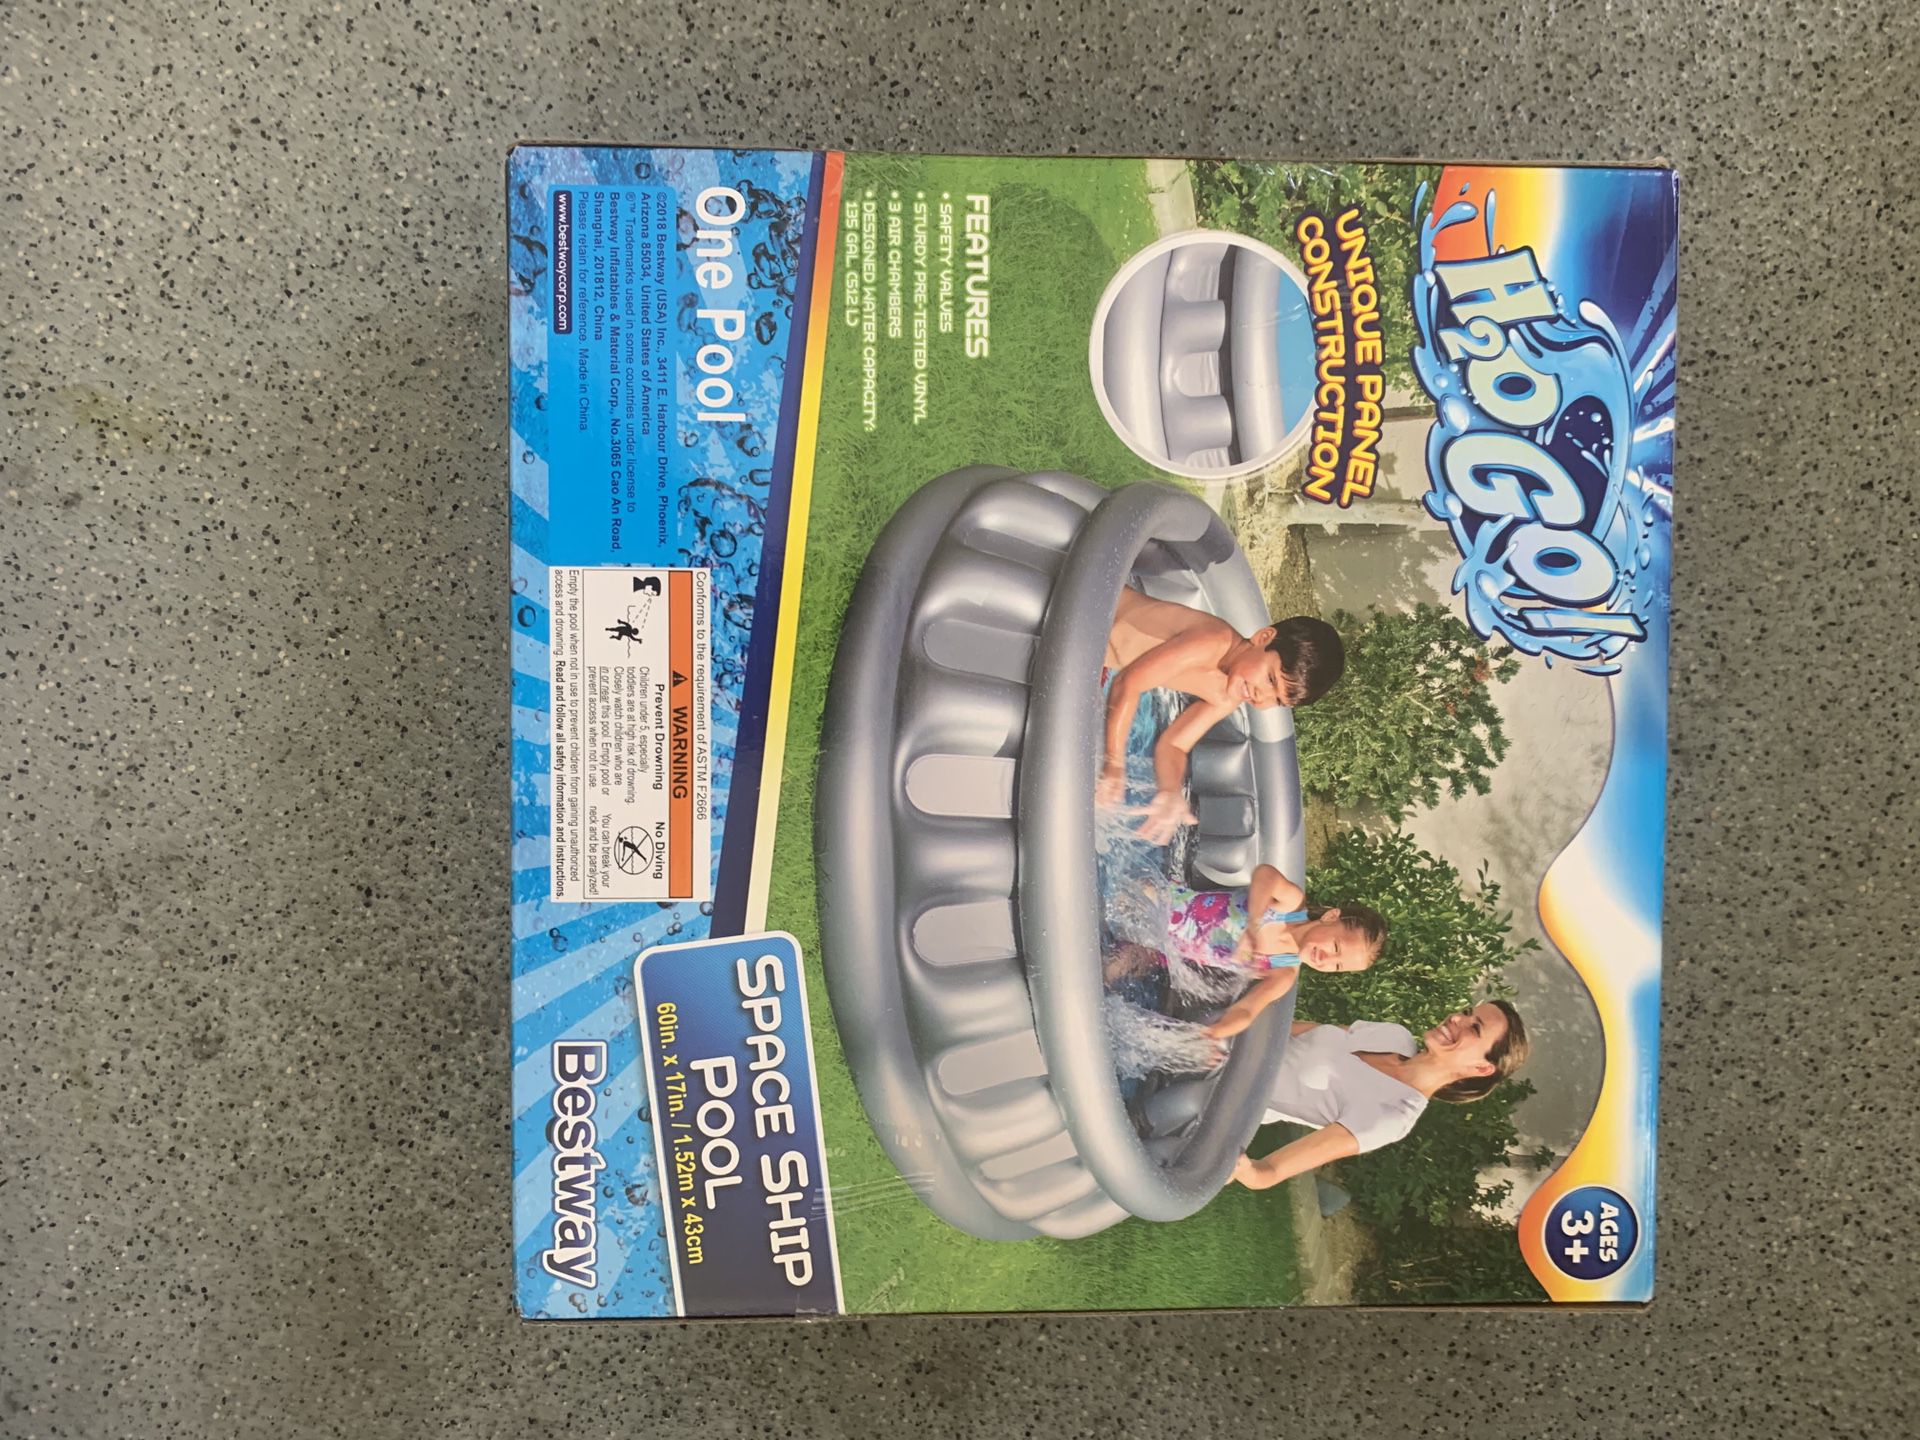 H2o Go Inflatable Space Ship Pool Kids 60in. x 17in. 60" x 17" New Bestway